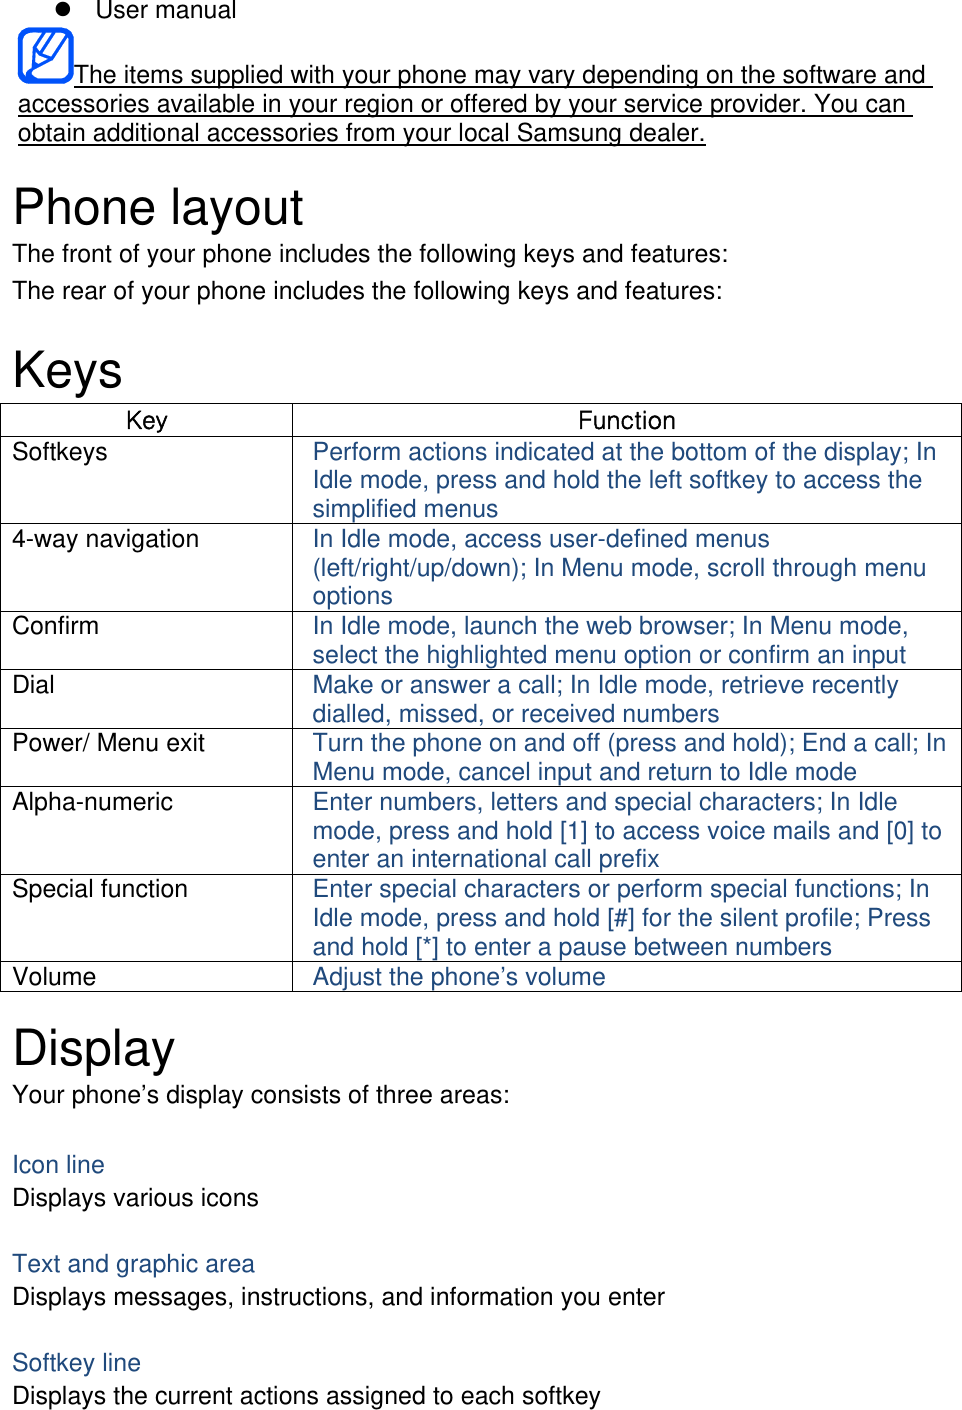  User manual The items supplied with your phone may vary depending on the software and accessories available in your region or offered by your service provider. You can obtain additional accessories from your local Samsung dealer.  Phone layout The front of your phone includes the following keys and features: The rear of your phone includes the following keys and features:  Keys Ky   Softkeys  Perform actions indicated at the bottom of the display; In Idle mode, press and hold the left softkey to access the simplified menus 4-way navigation  In Idle mode, access user-defined menus (left/right/up/down); In Menu mode, scroll through menu options Confirm  In Idle mode, launch the web browser; In Menu mode, select the highlighted menu option or confirm an input Dial  Make or answer a call; In Idle mode, retrieve recently dialled, missed, or received numbers Power/ Menu exit  Turn the phone on and off (press and hold); End a call; In Menu mode, cancel input and return to Idle mode Alpha-numeric  Enter numbers, letters and special characters; In Idle mode, press and hold [1] to access voice mails and [0] to enter an international call prefix Special function  Enter special characters or perform special functions; In Idle mode, press and hold [#] for the silent profile; Press and hold [*] to enter a pause between numbers Volume  Adjust the phone’s volume  Display Your phone’s display consists of three areas:  Icon line Displays various icons  Text and graphic area Displays messages, instructions, and information you enter  Softkey line Displays the current actions assigned to each softkey 